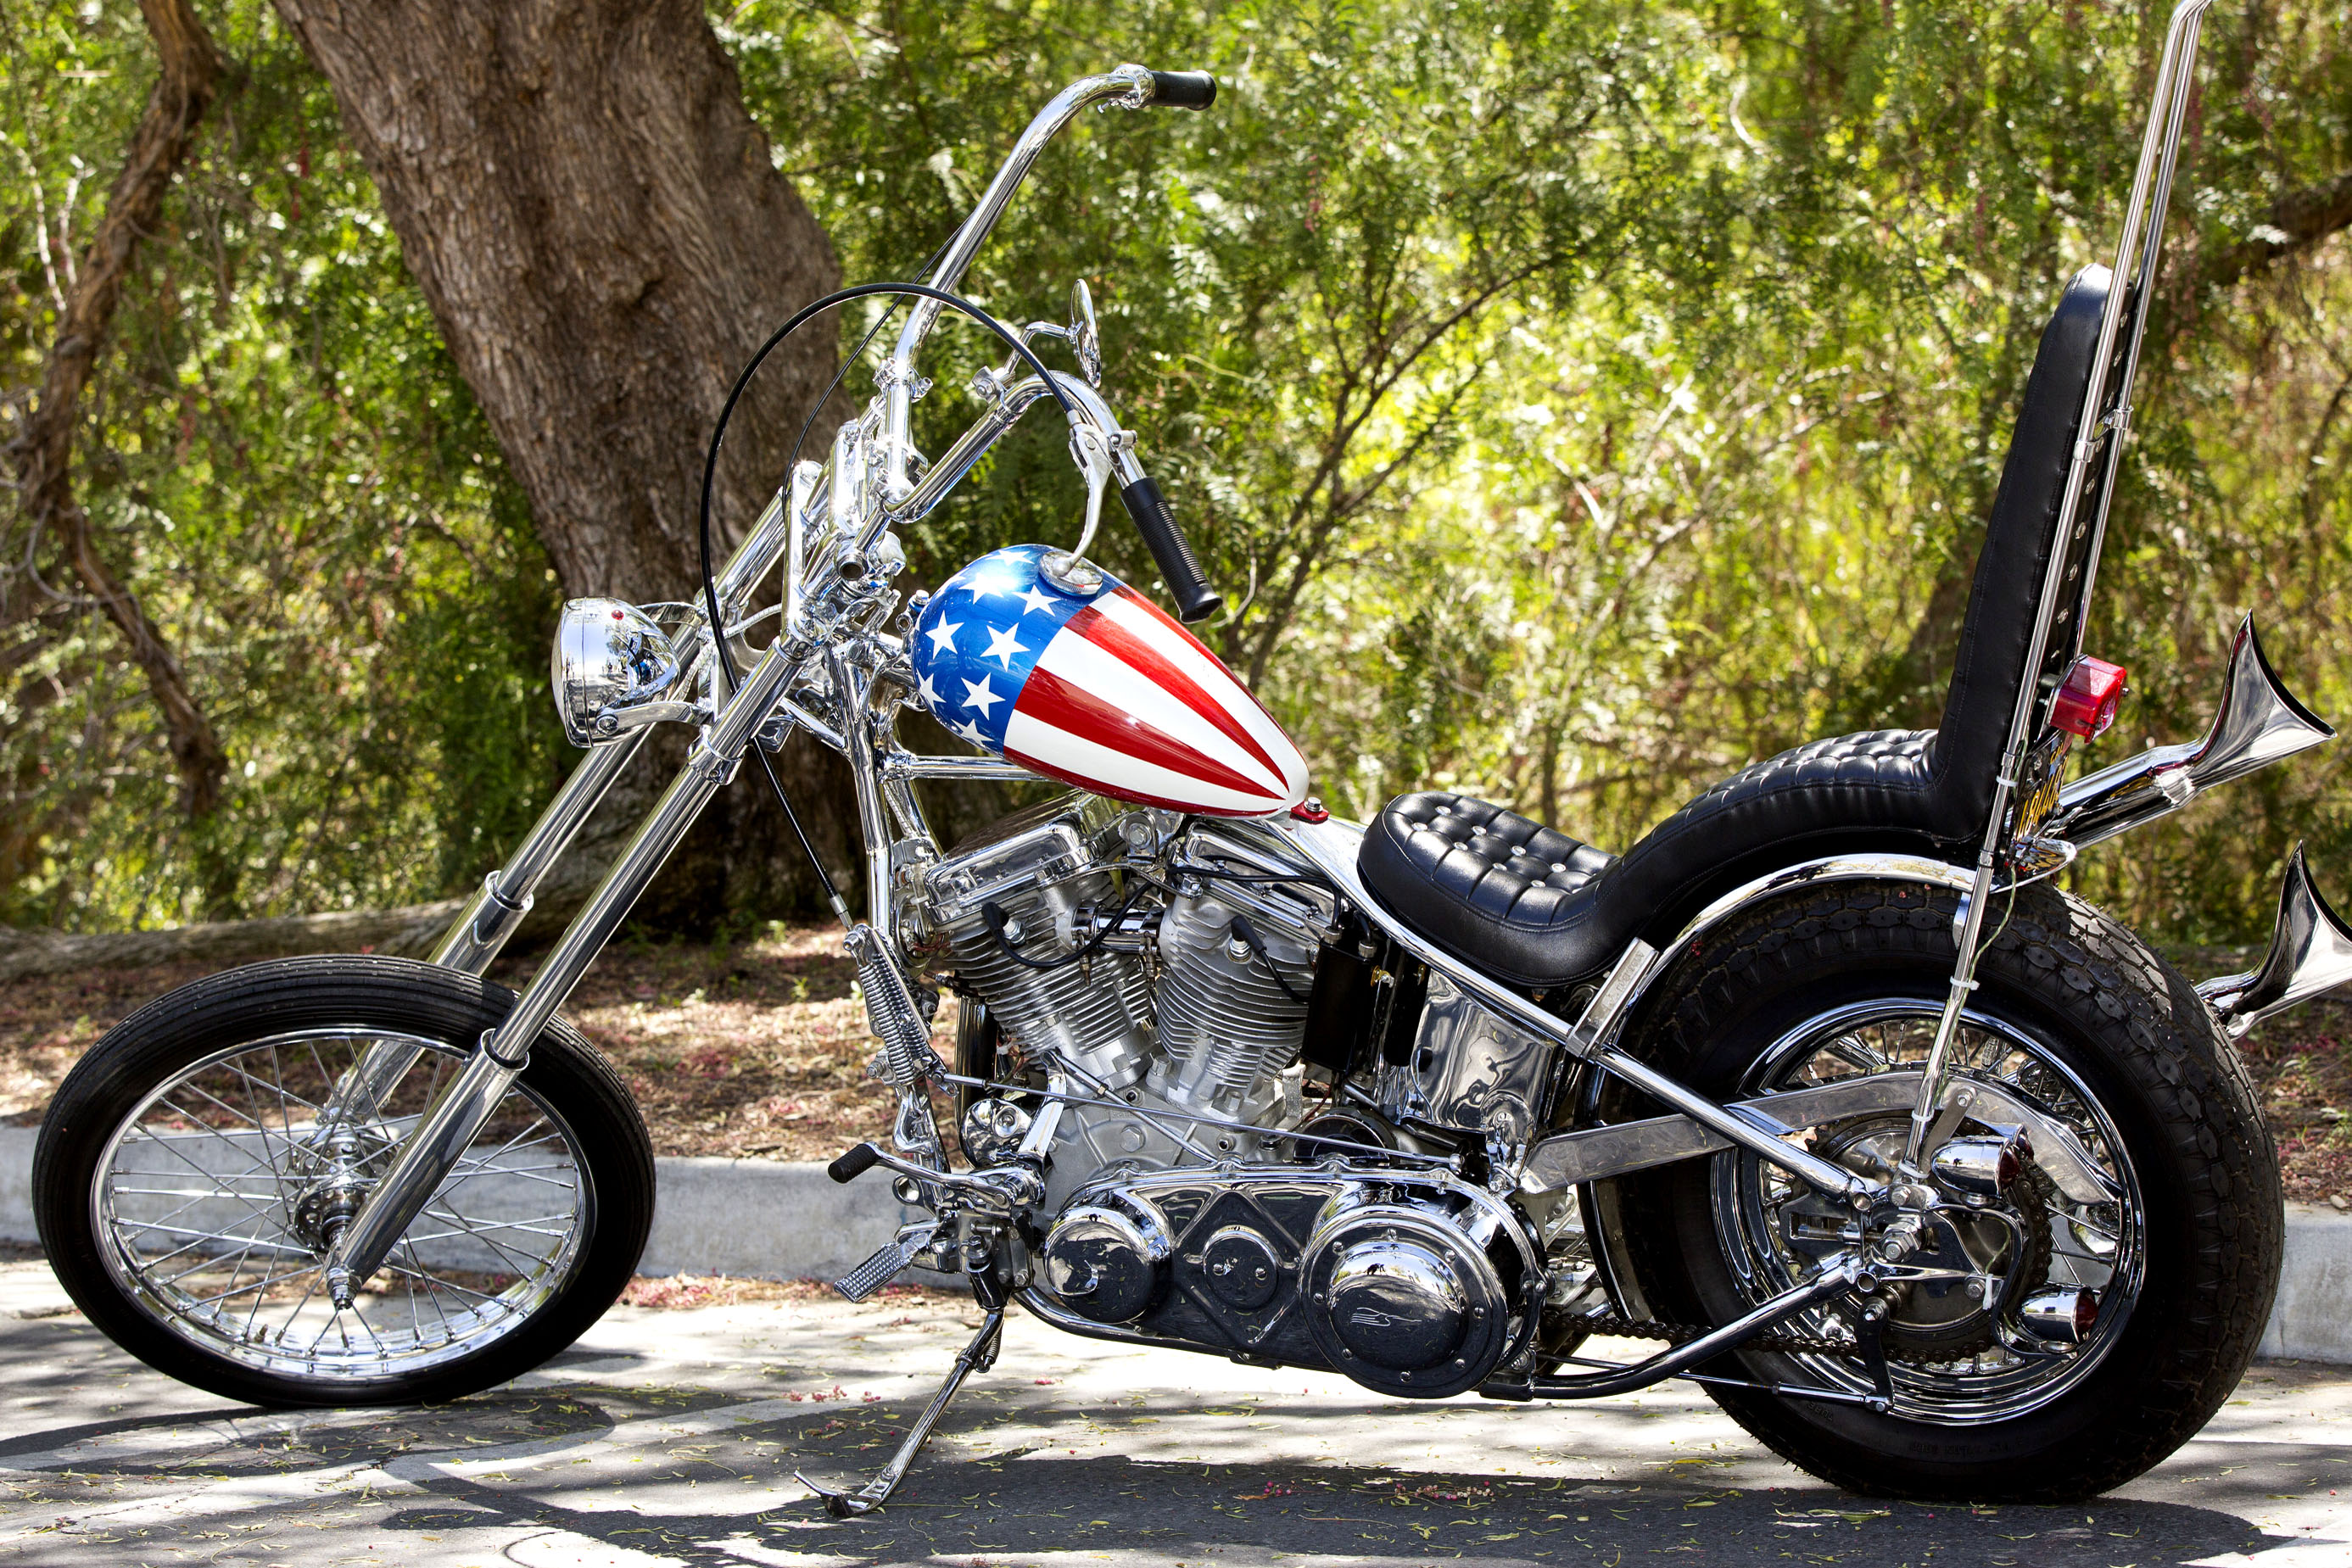 Easy Rider bike going to auction New York Post